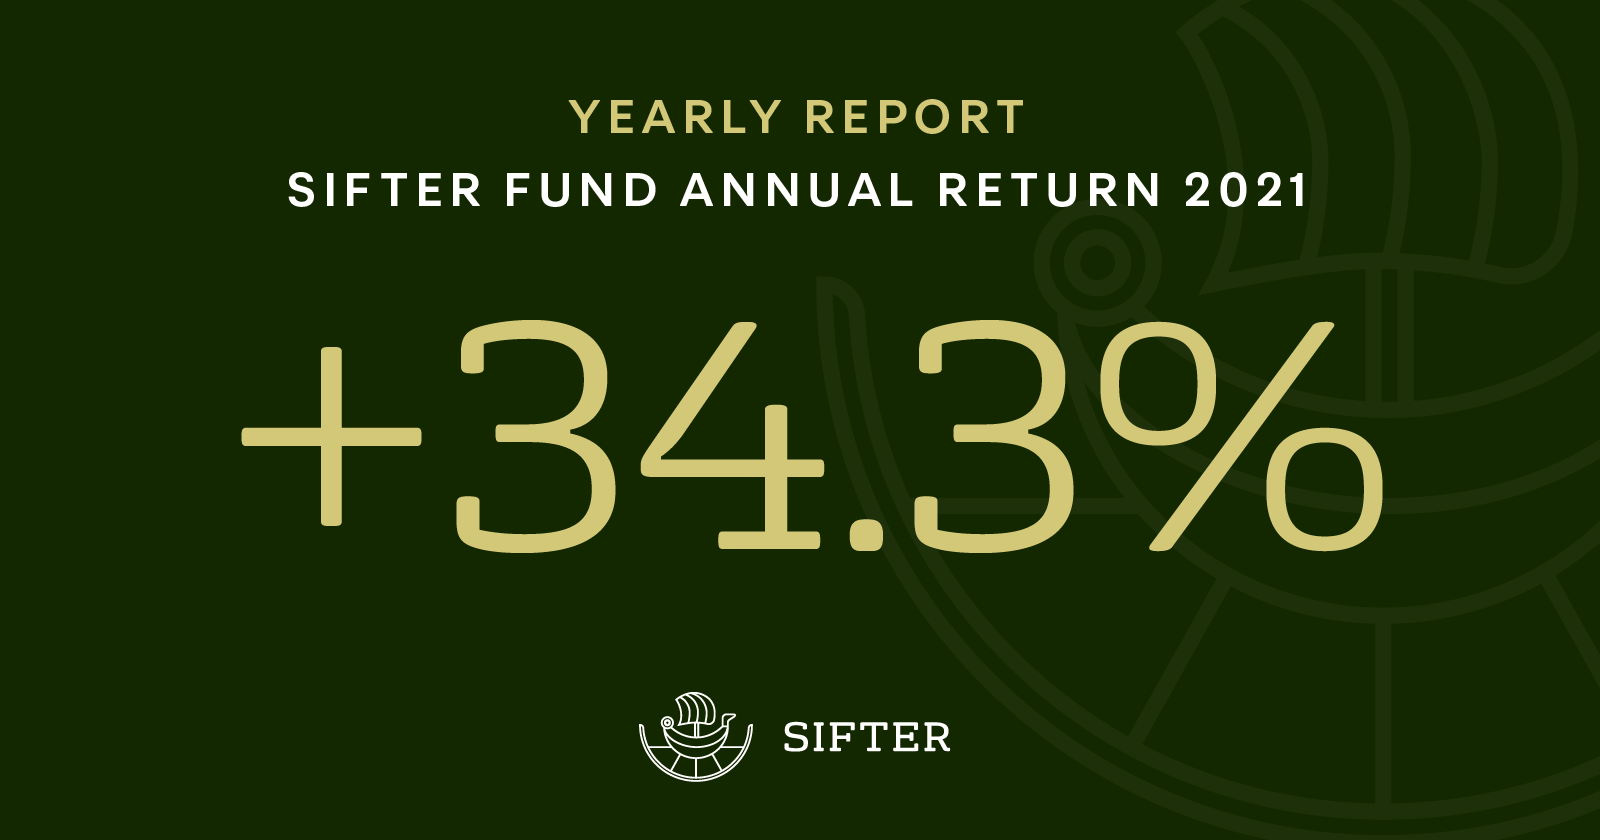 Quality Investing generated an annual return of +34.3% to the Sifter Fund in 2021